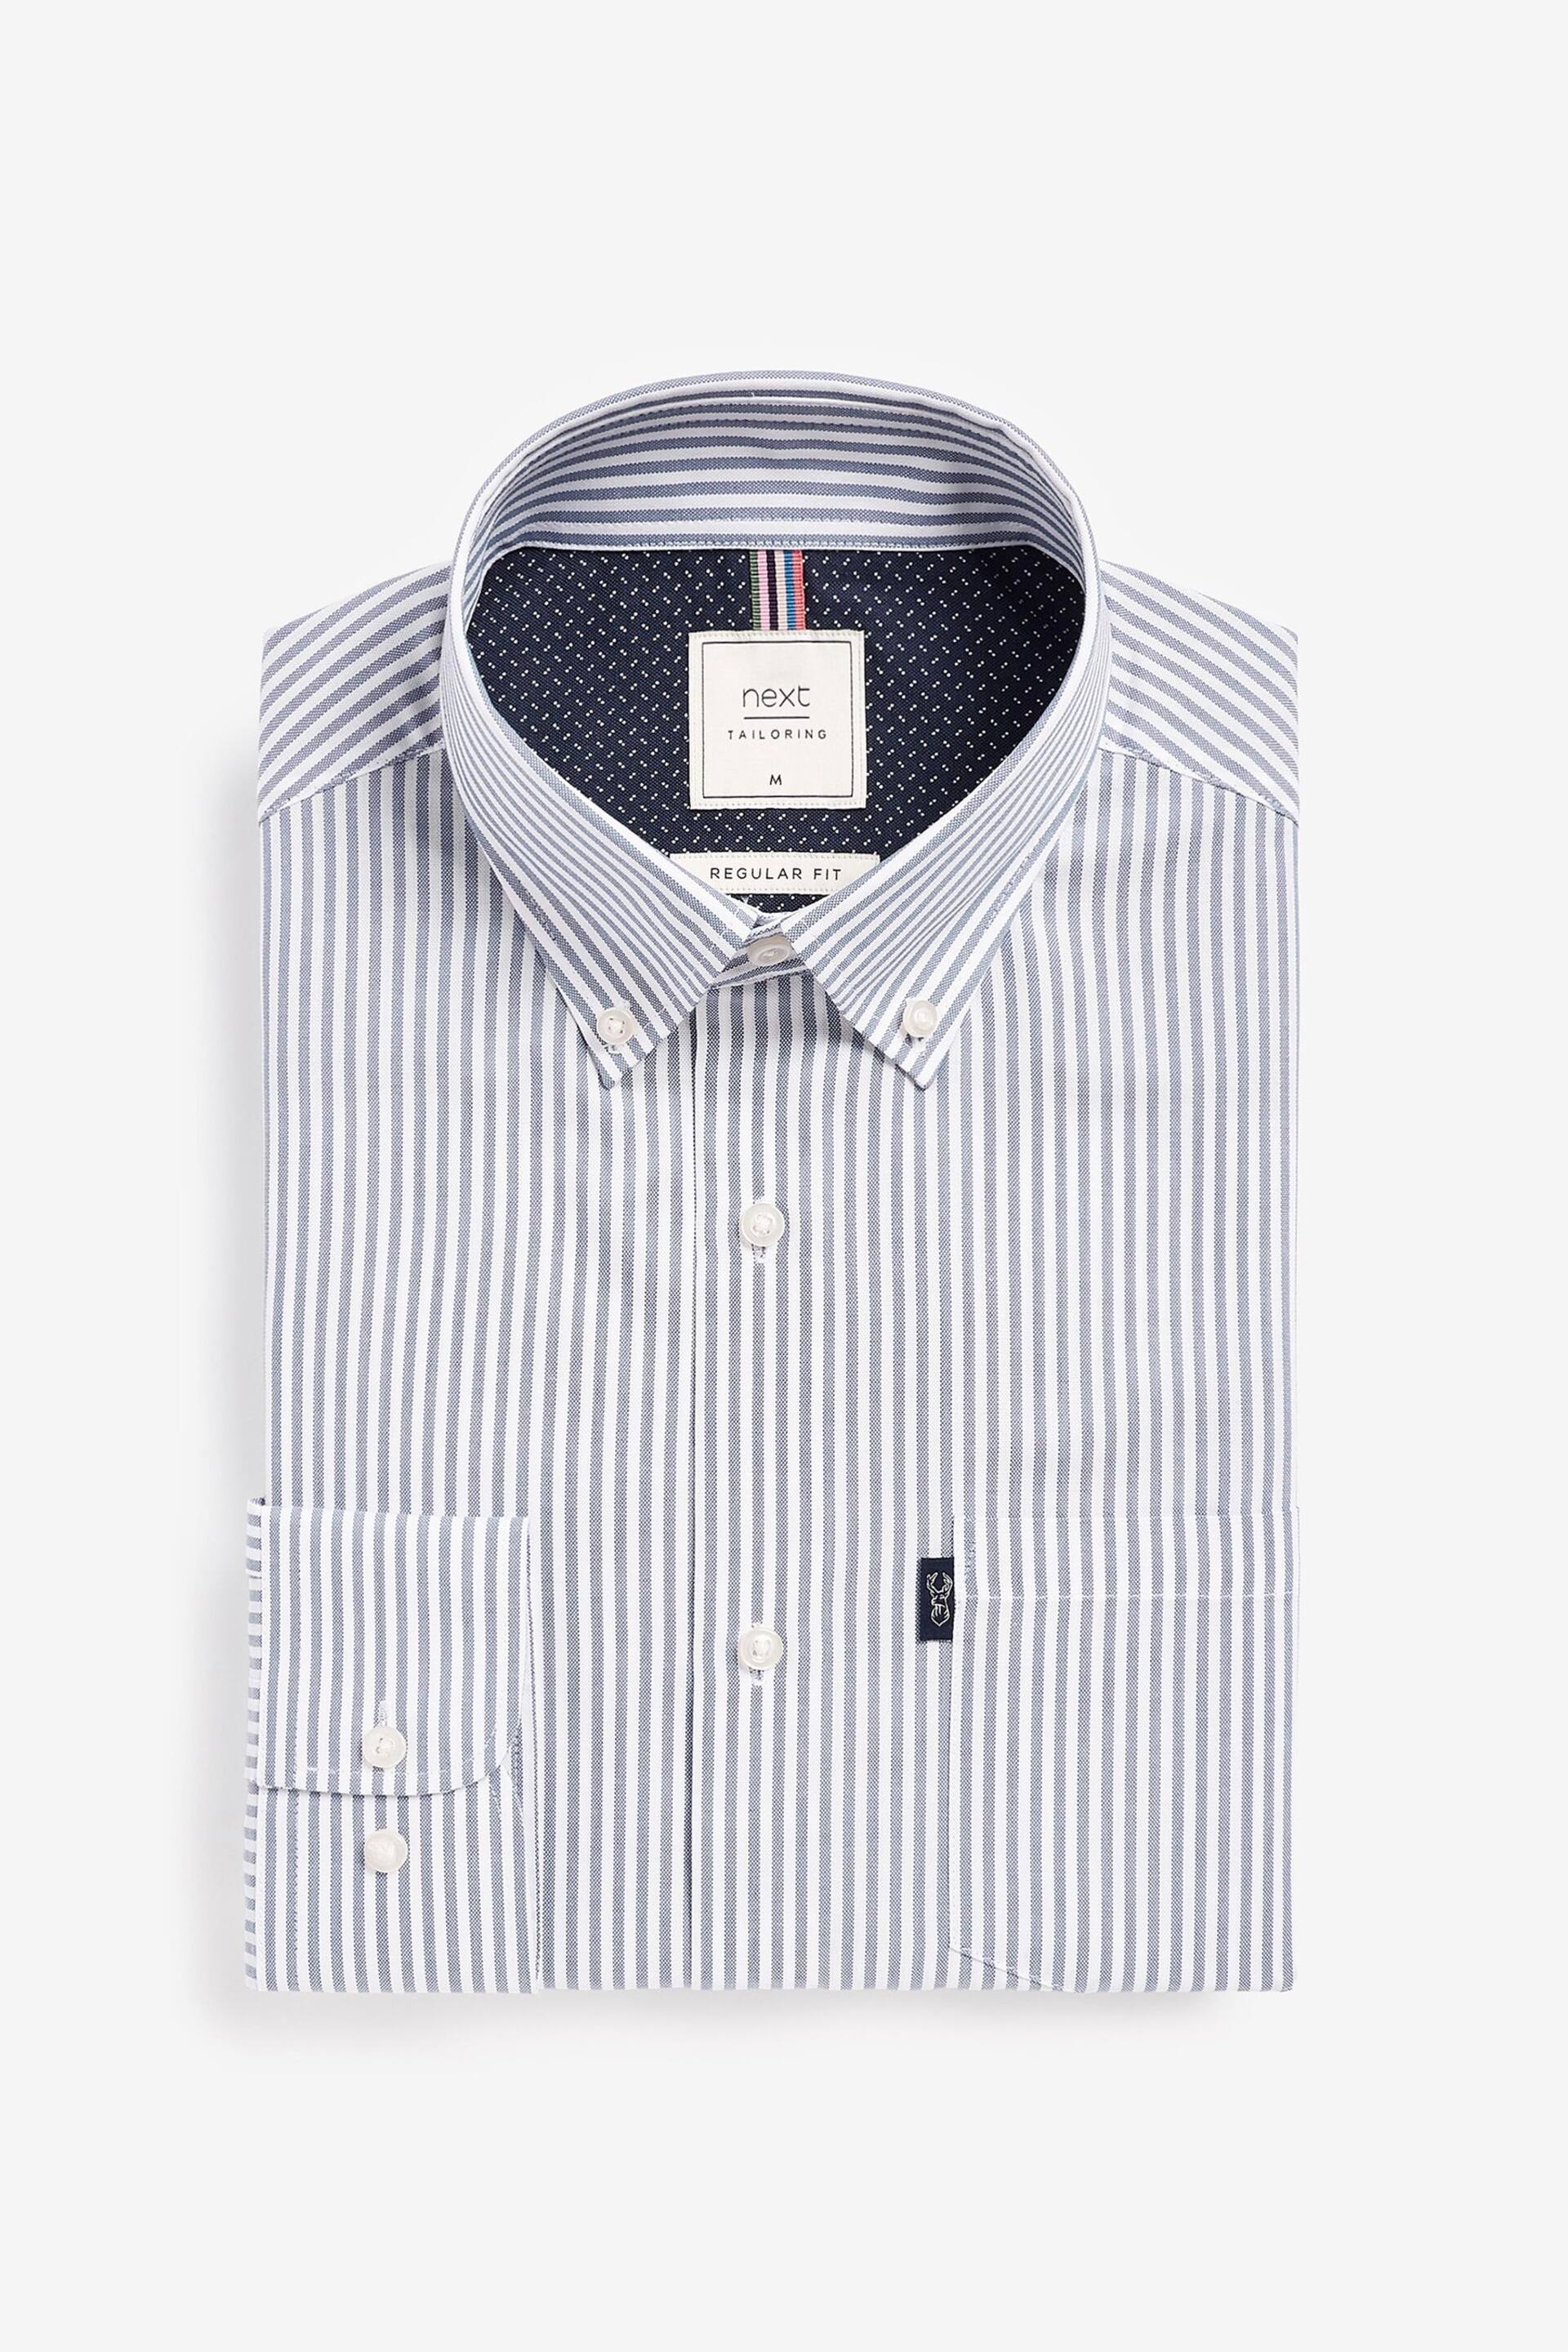 White/Blue Stripe Regular Fit Easy Iron Button Down Oxford Shirt - Image 1 of 9